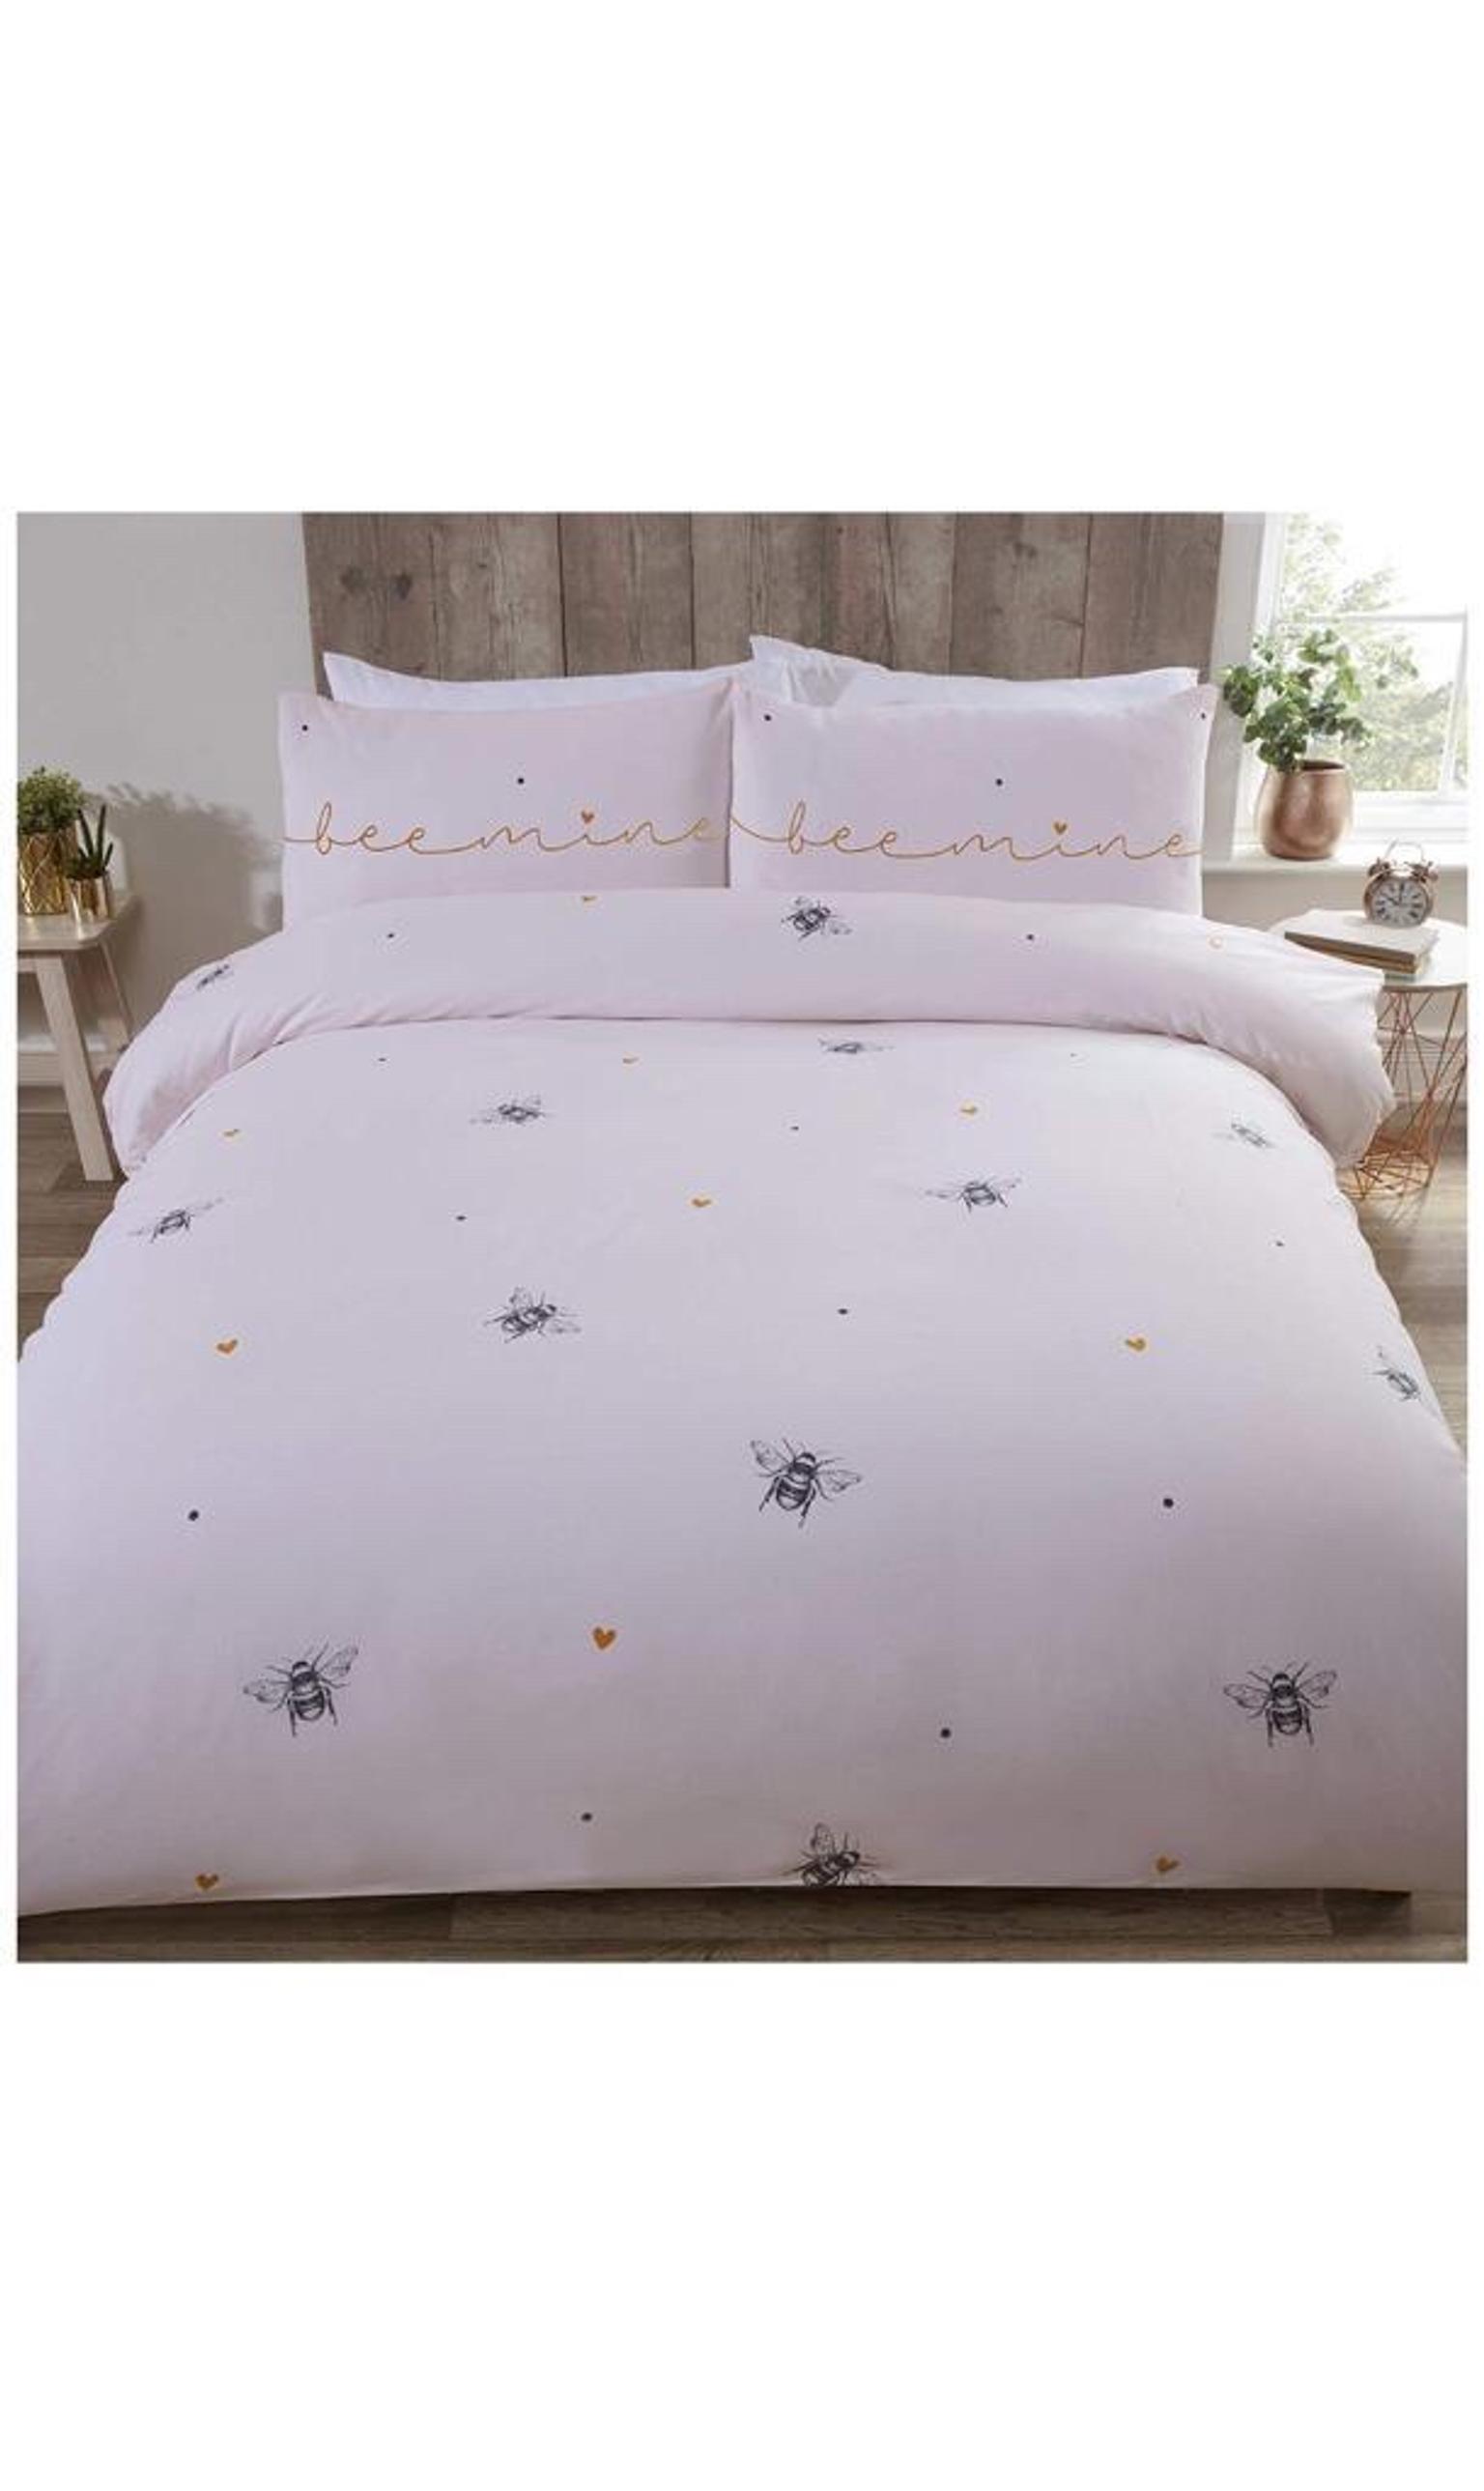 Manchester Bee King And Super King Size Duvet In M45 Lane Fur 9 00